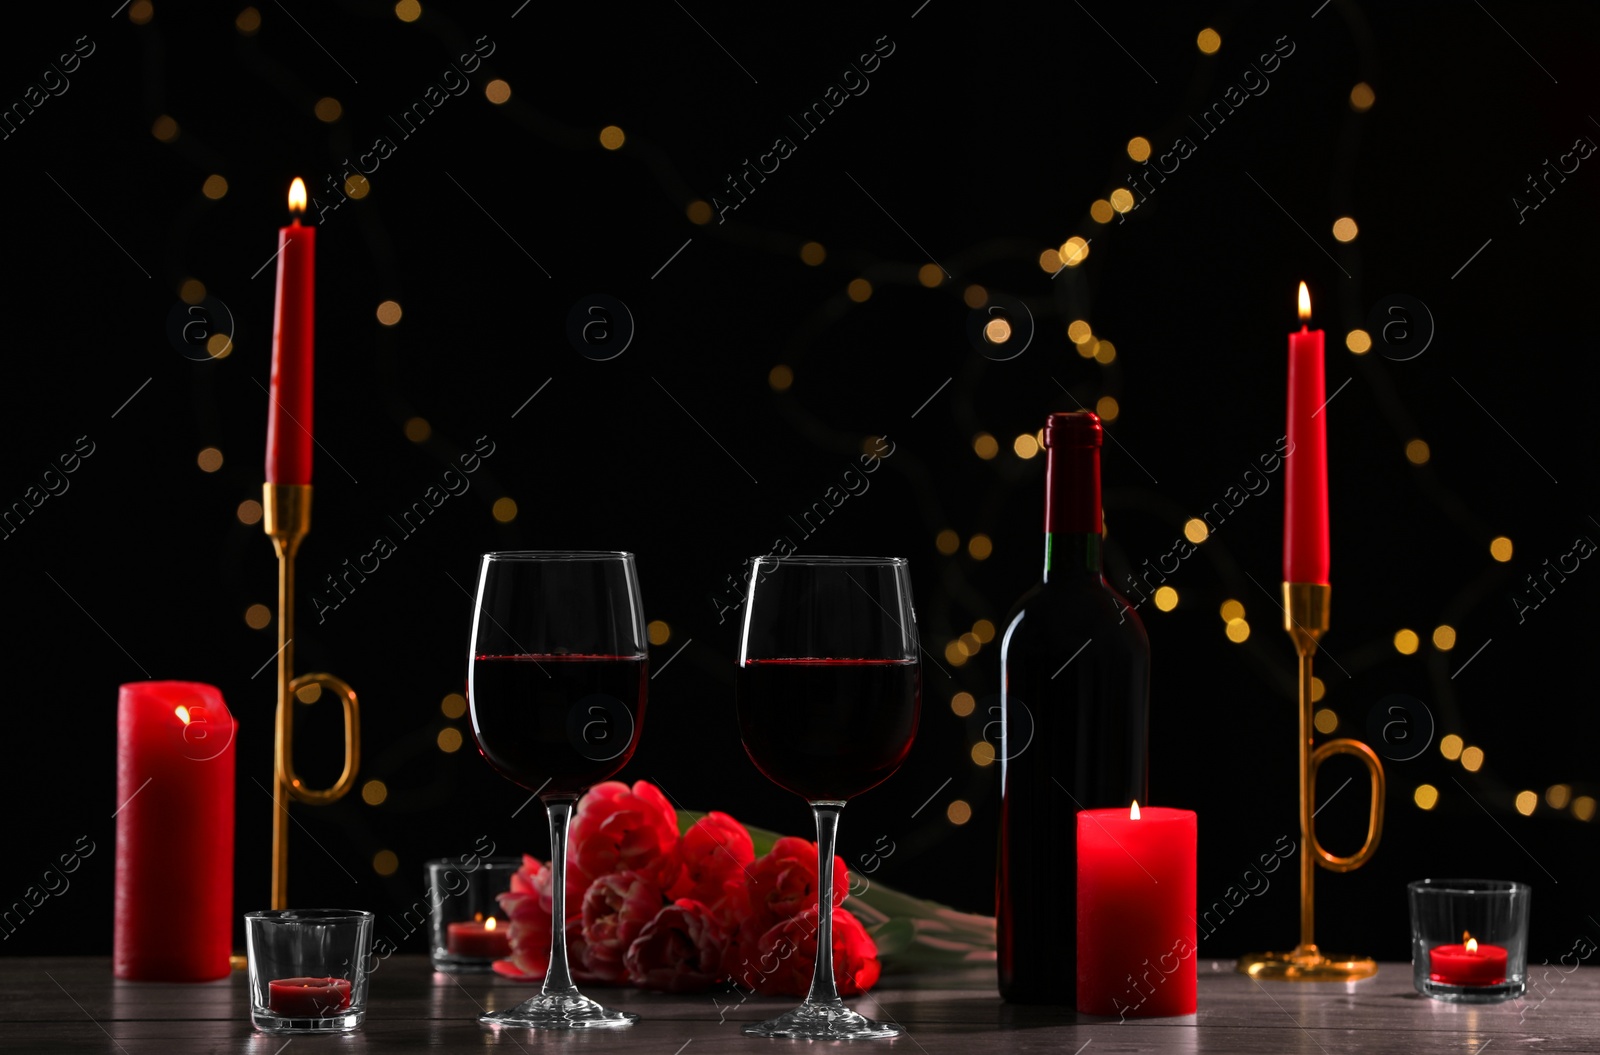 Photo of Glasses of red wine, tulip flowers and burning candles on black background against blurred lights. Romantic atmosphere